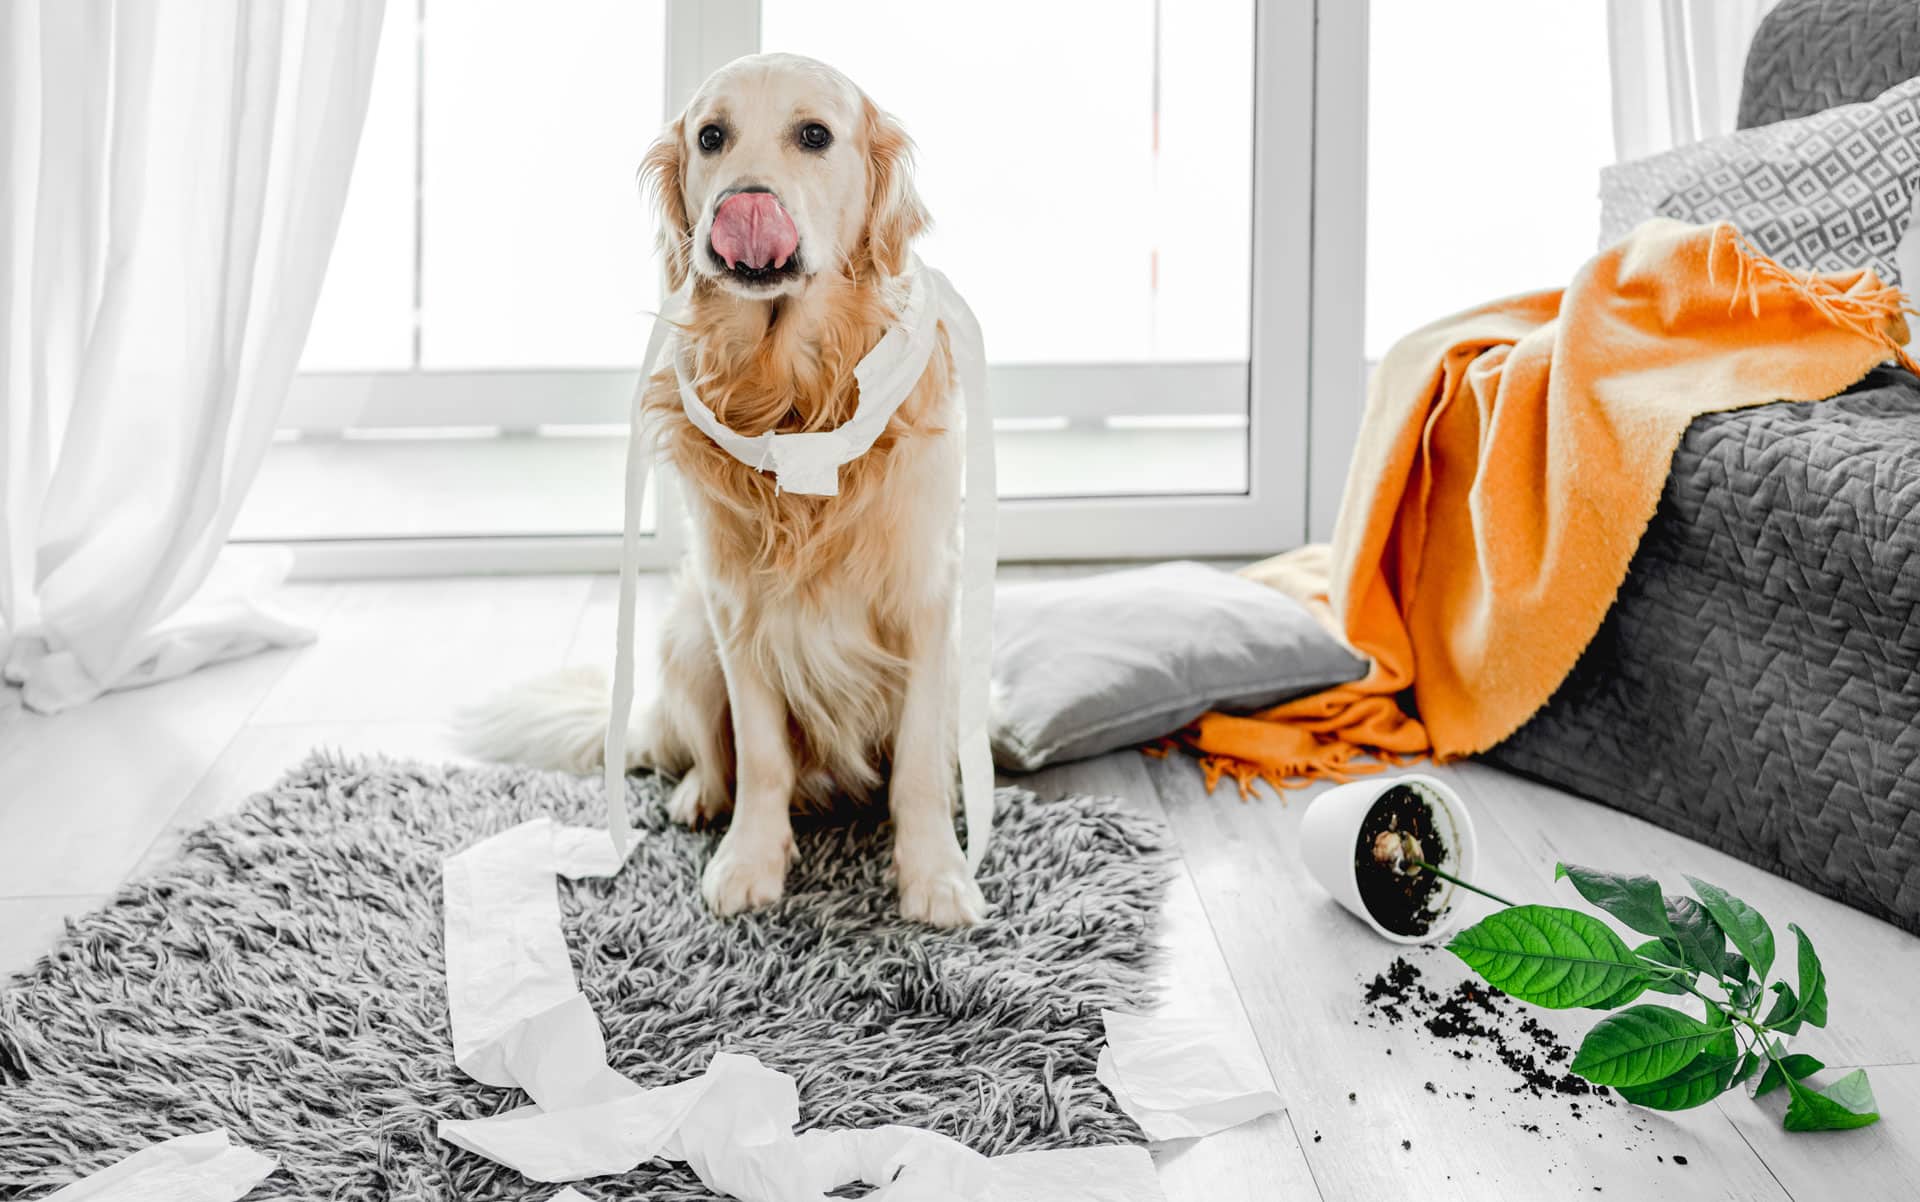 Preparing Your Home For a New Dog